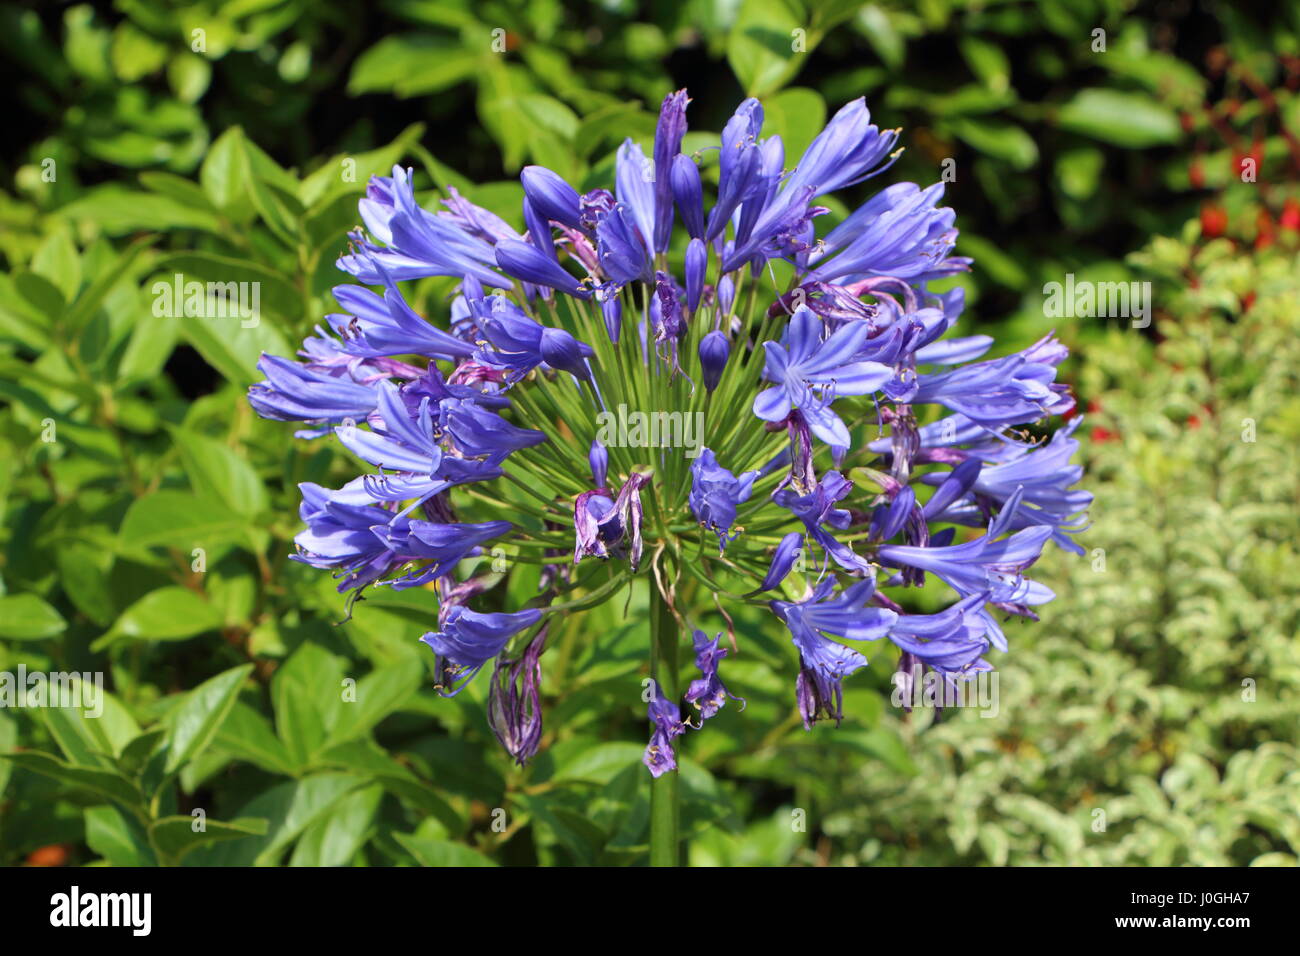 Agapanthus flower in a garden Stock Photo